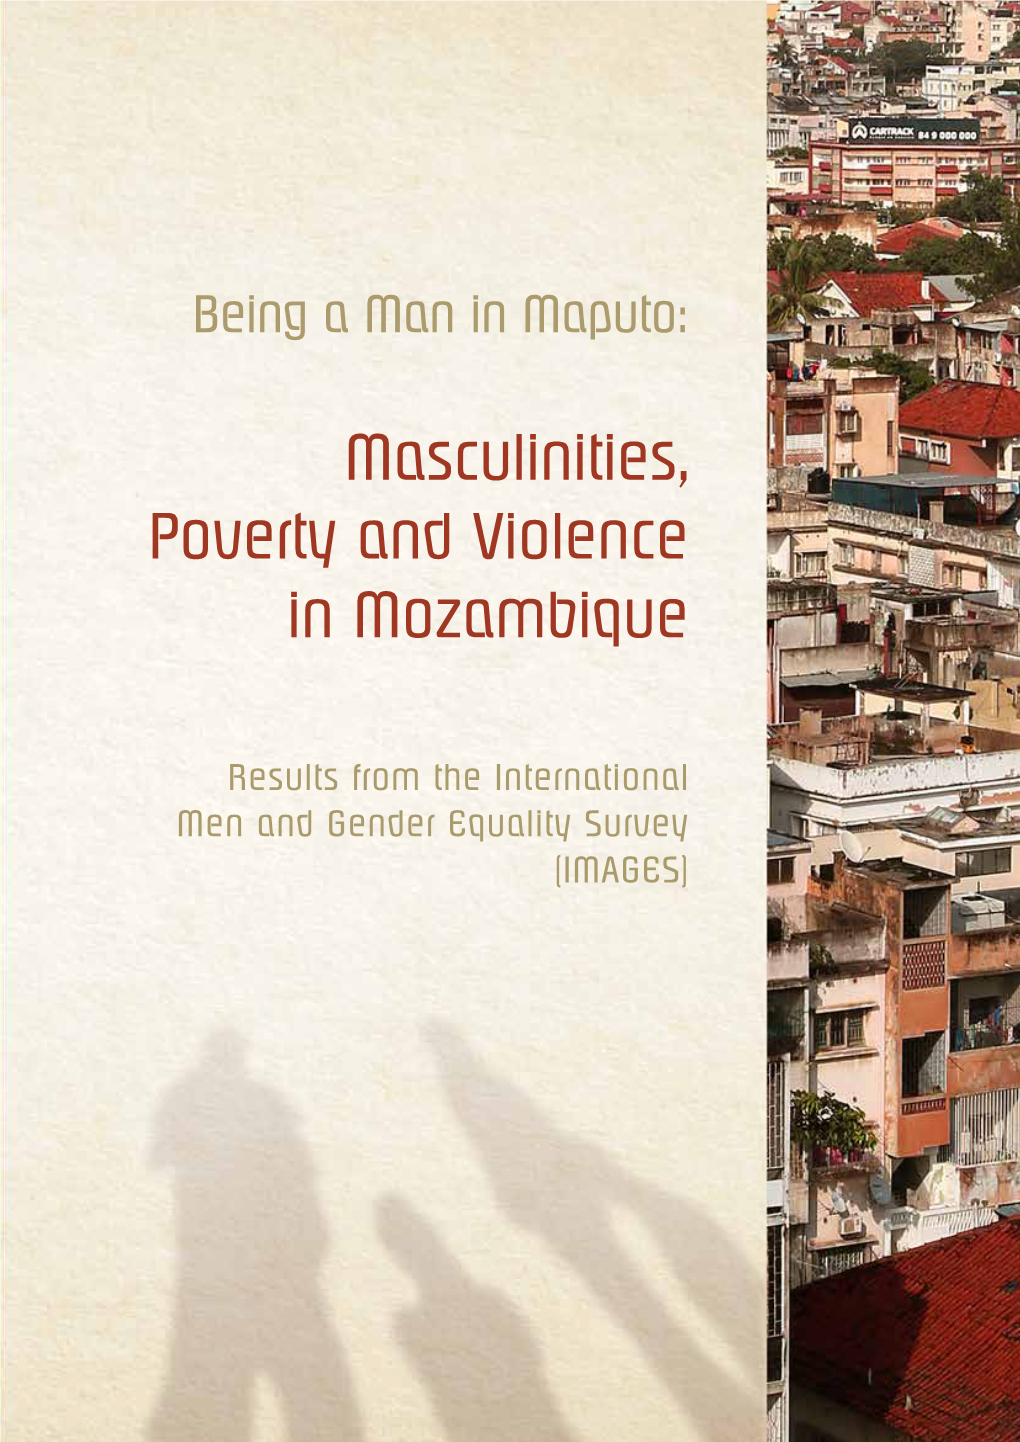 Masculinities, Poverty and Violence in Mozambique